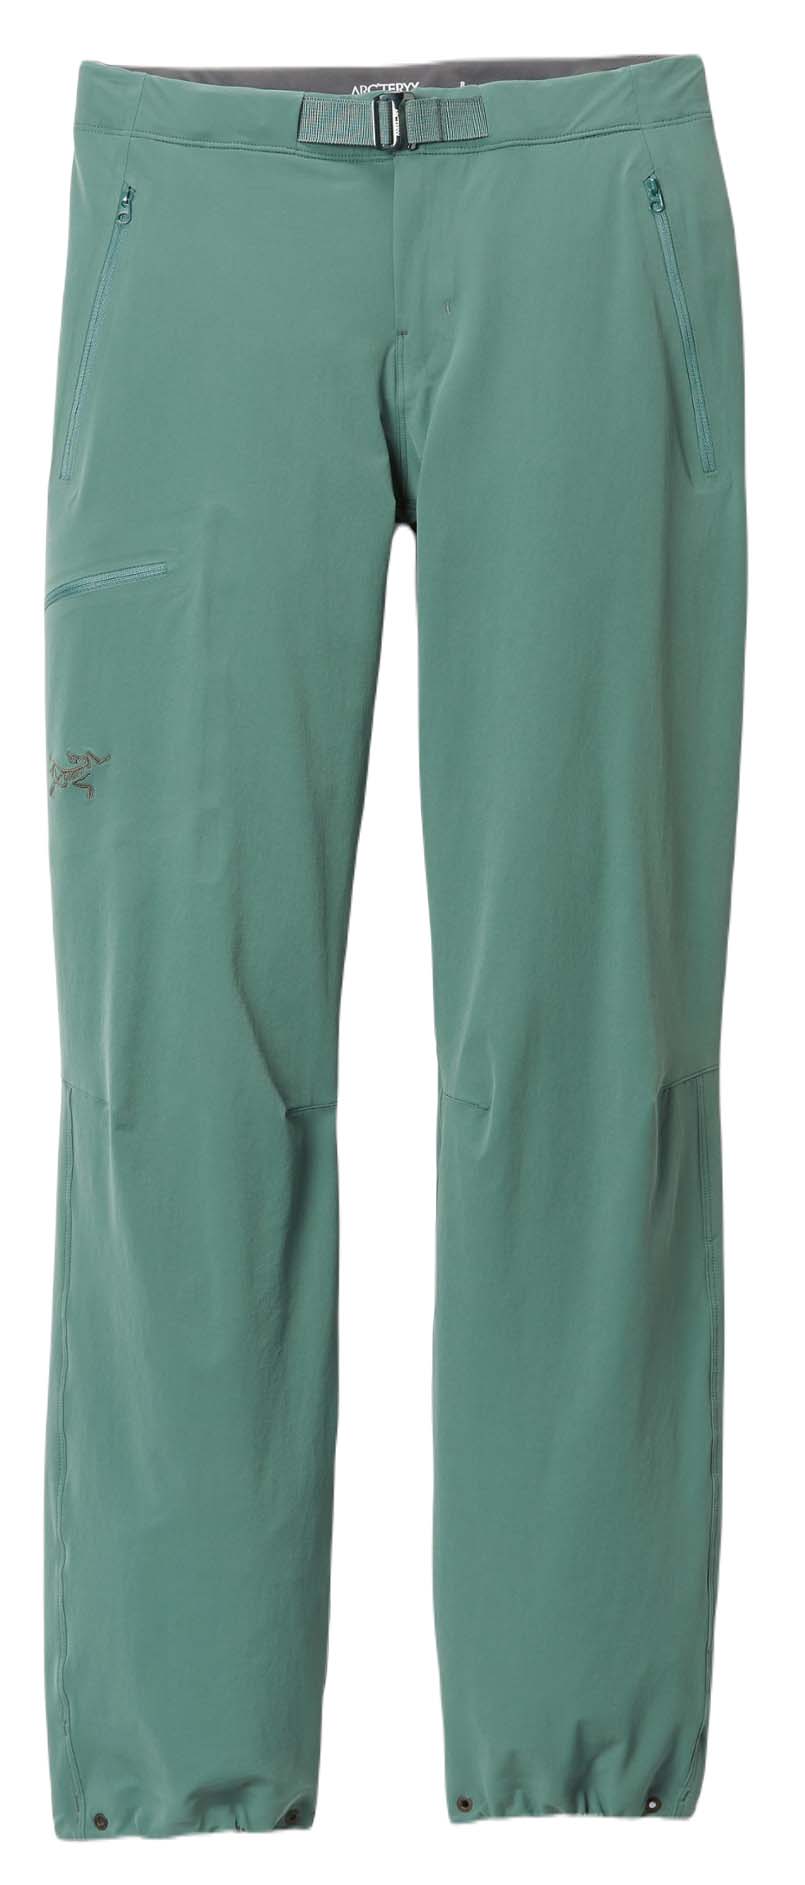 Athleta Pants Womens Size 0 Blue Jogger Outdoor Hiking Gym Running Pull On  Pants